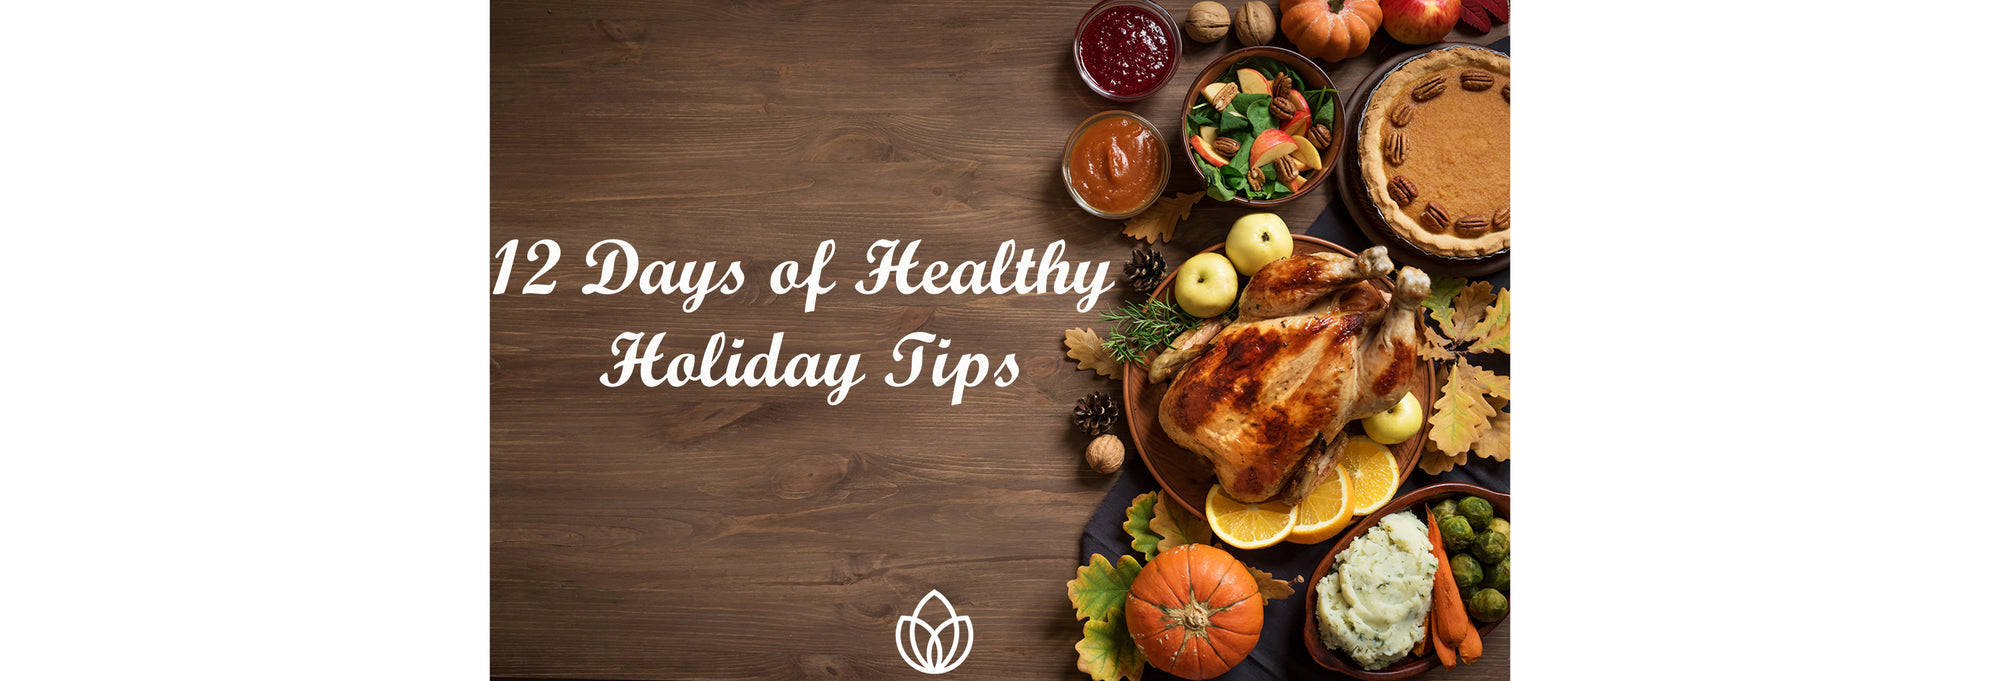 12 Days of Healthy Holiday Tips